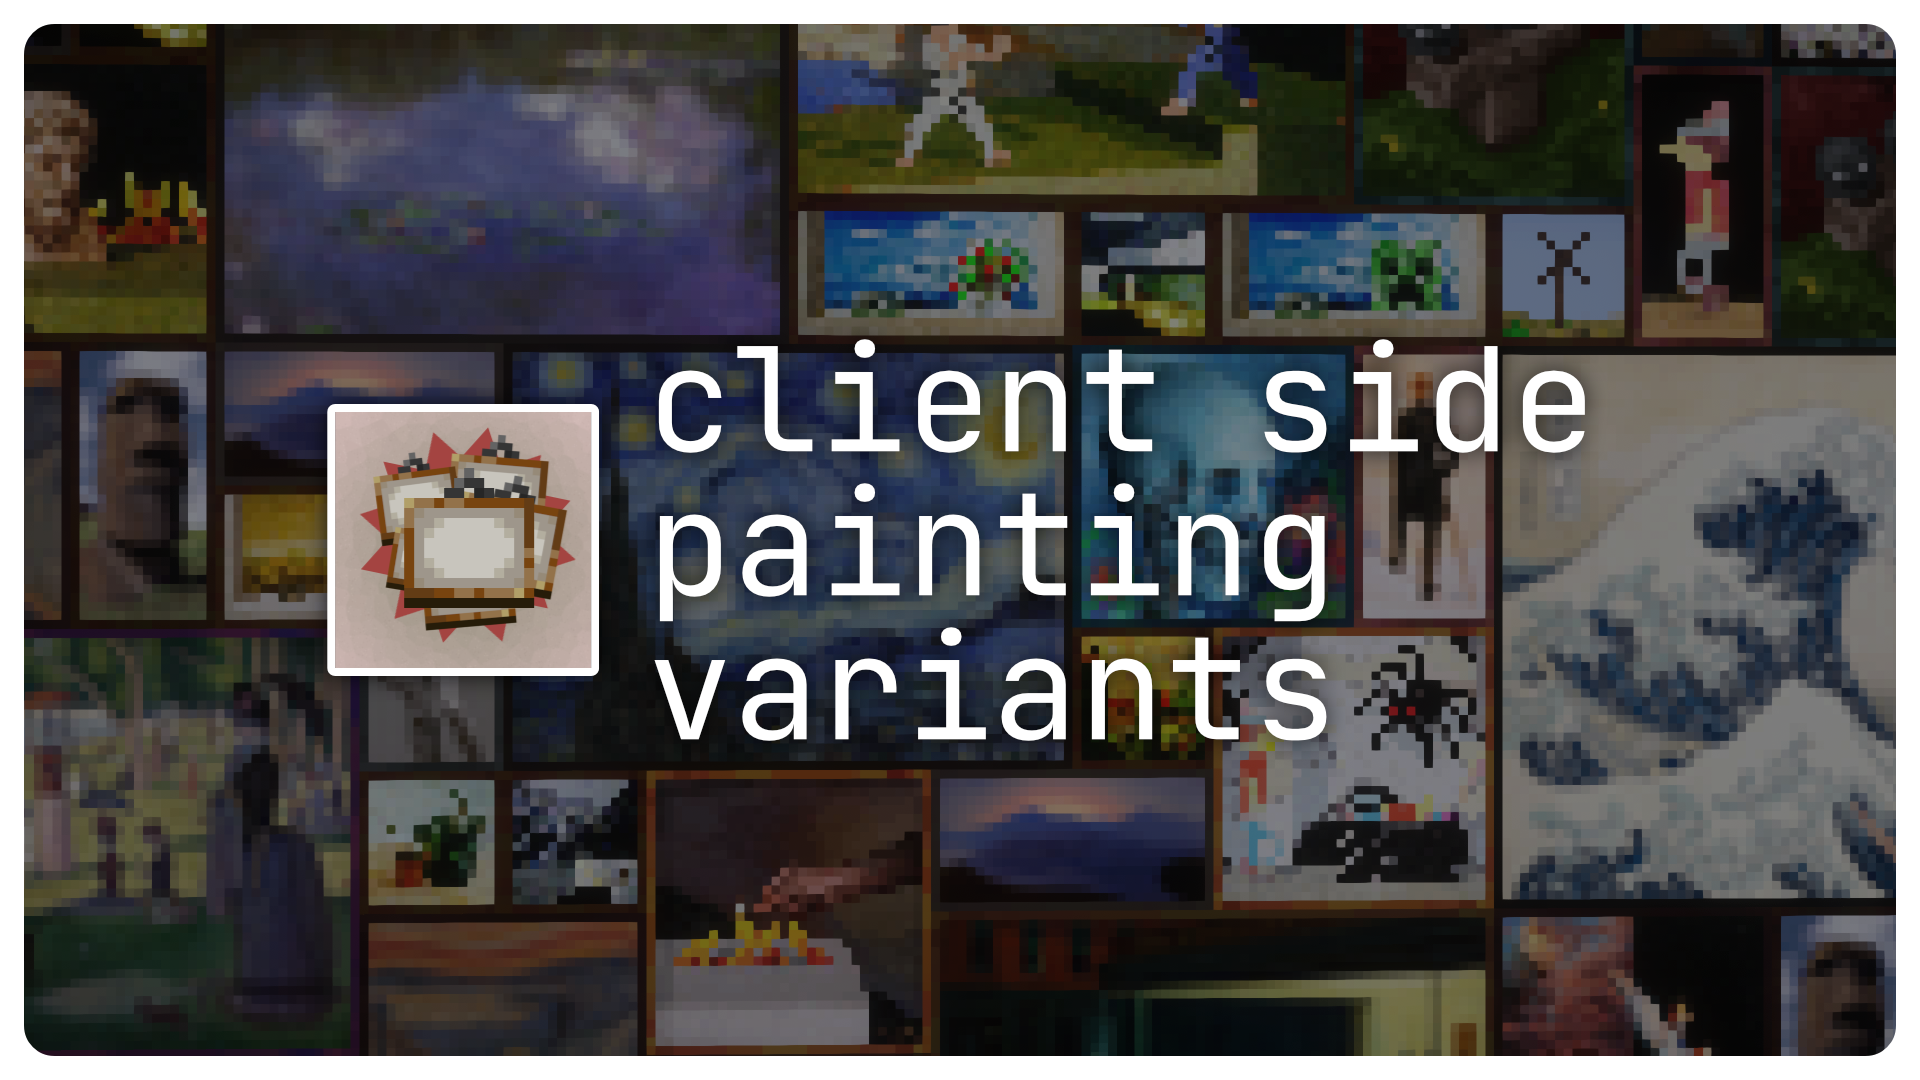 Add custom painting variants without overwriting existing paintings by using resource packs